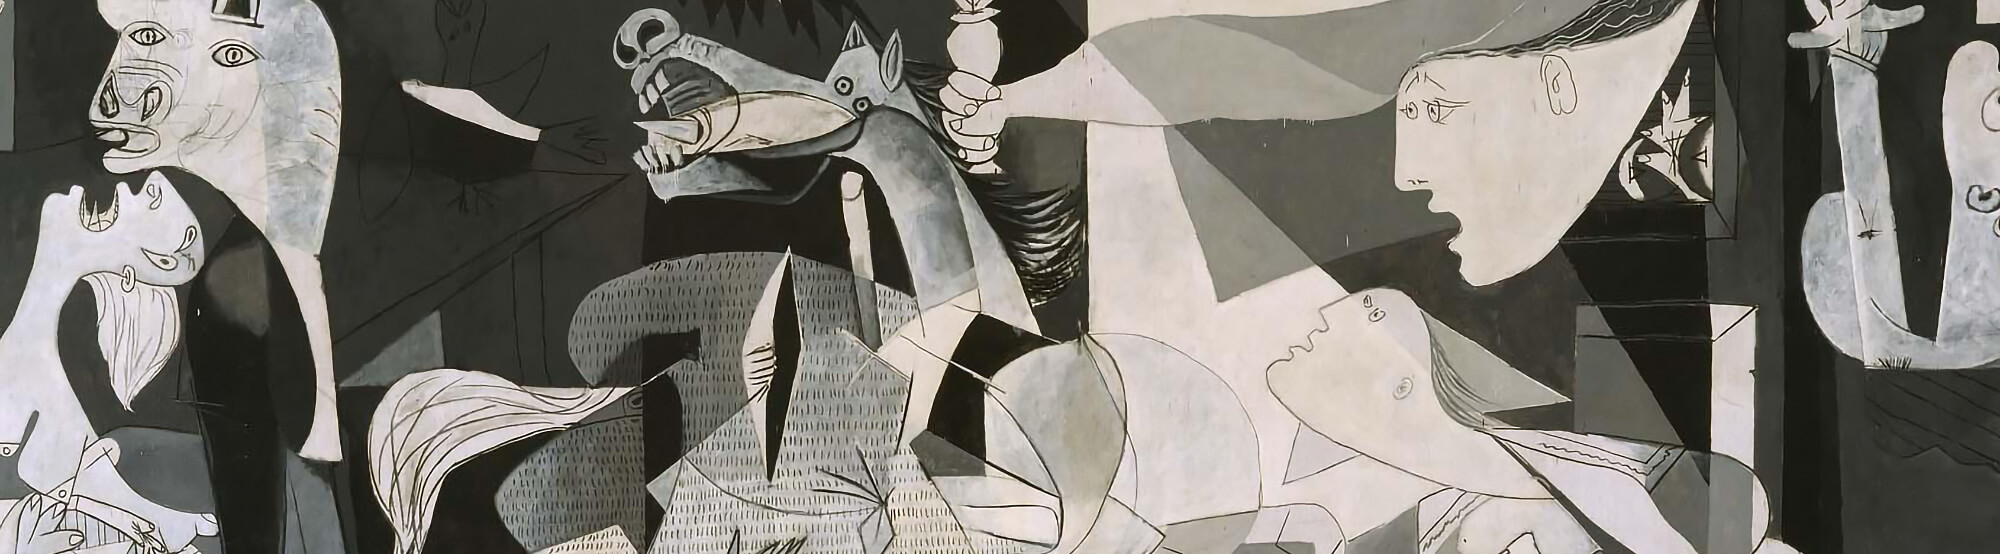 Detail of Guernica painting by Pablo Picasso